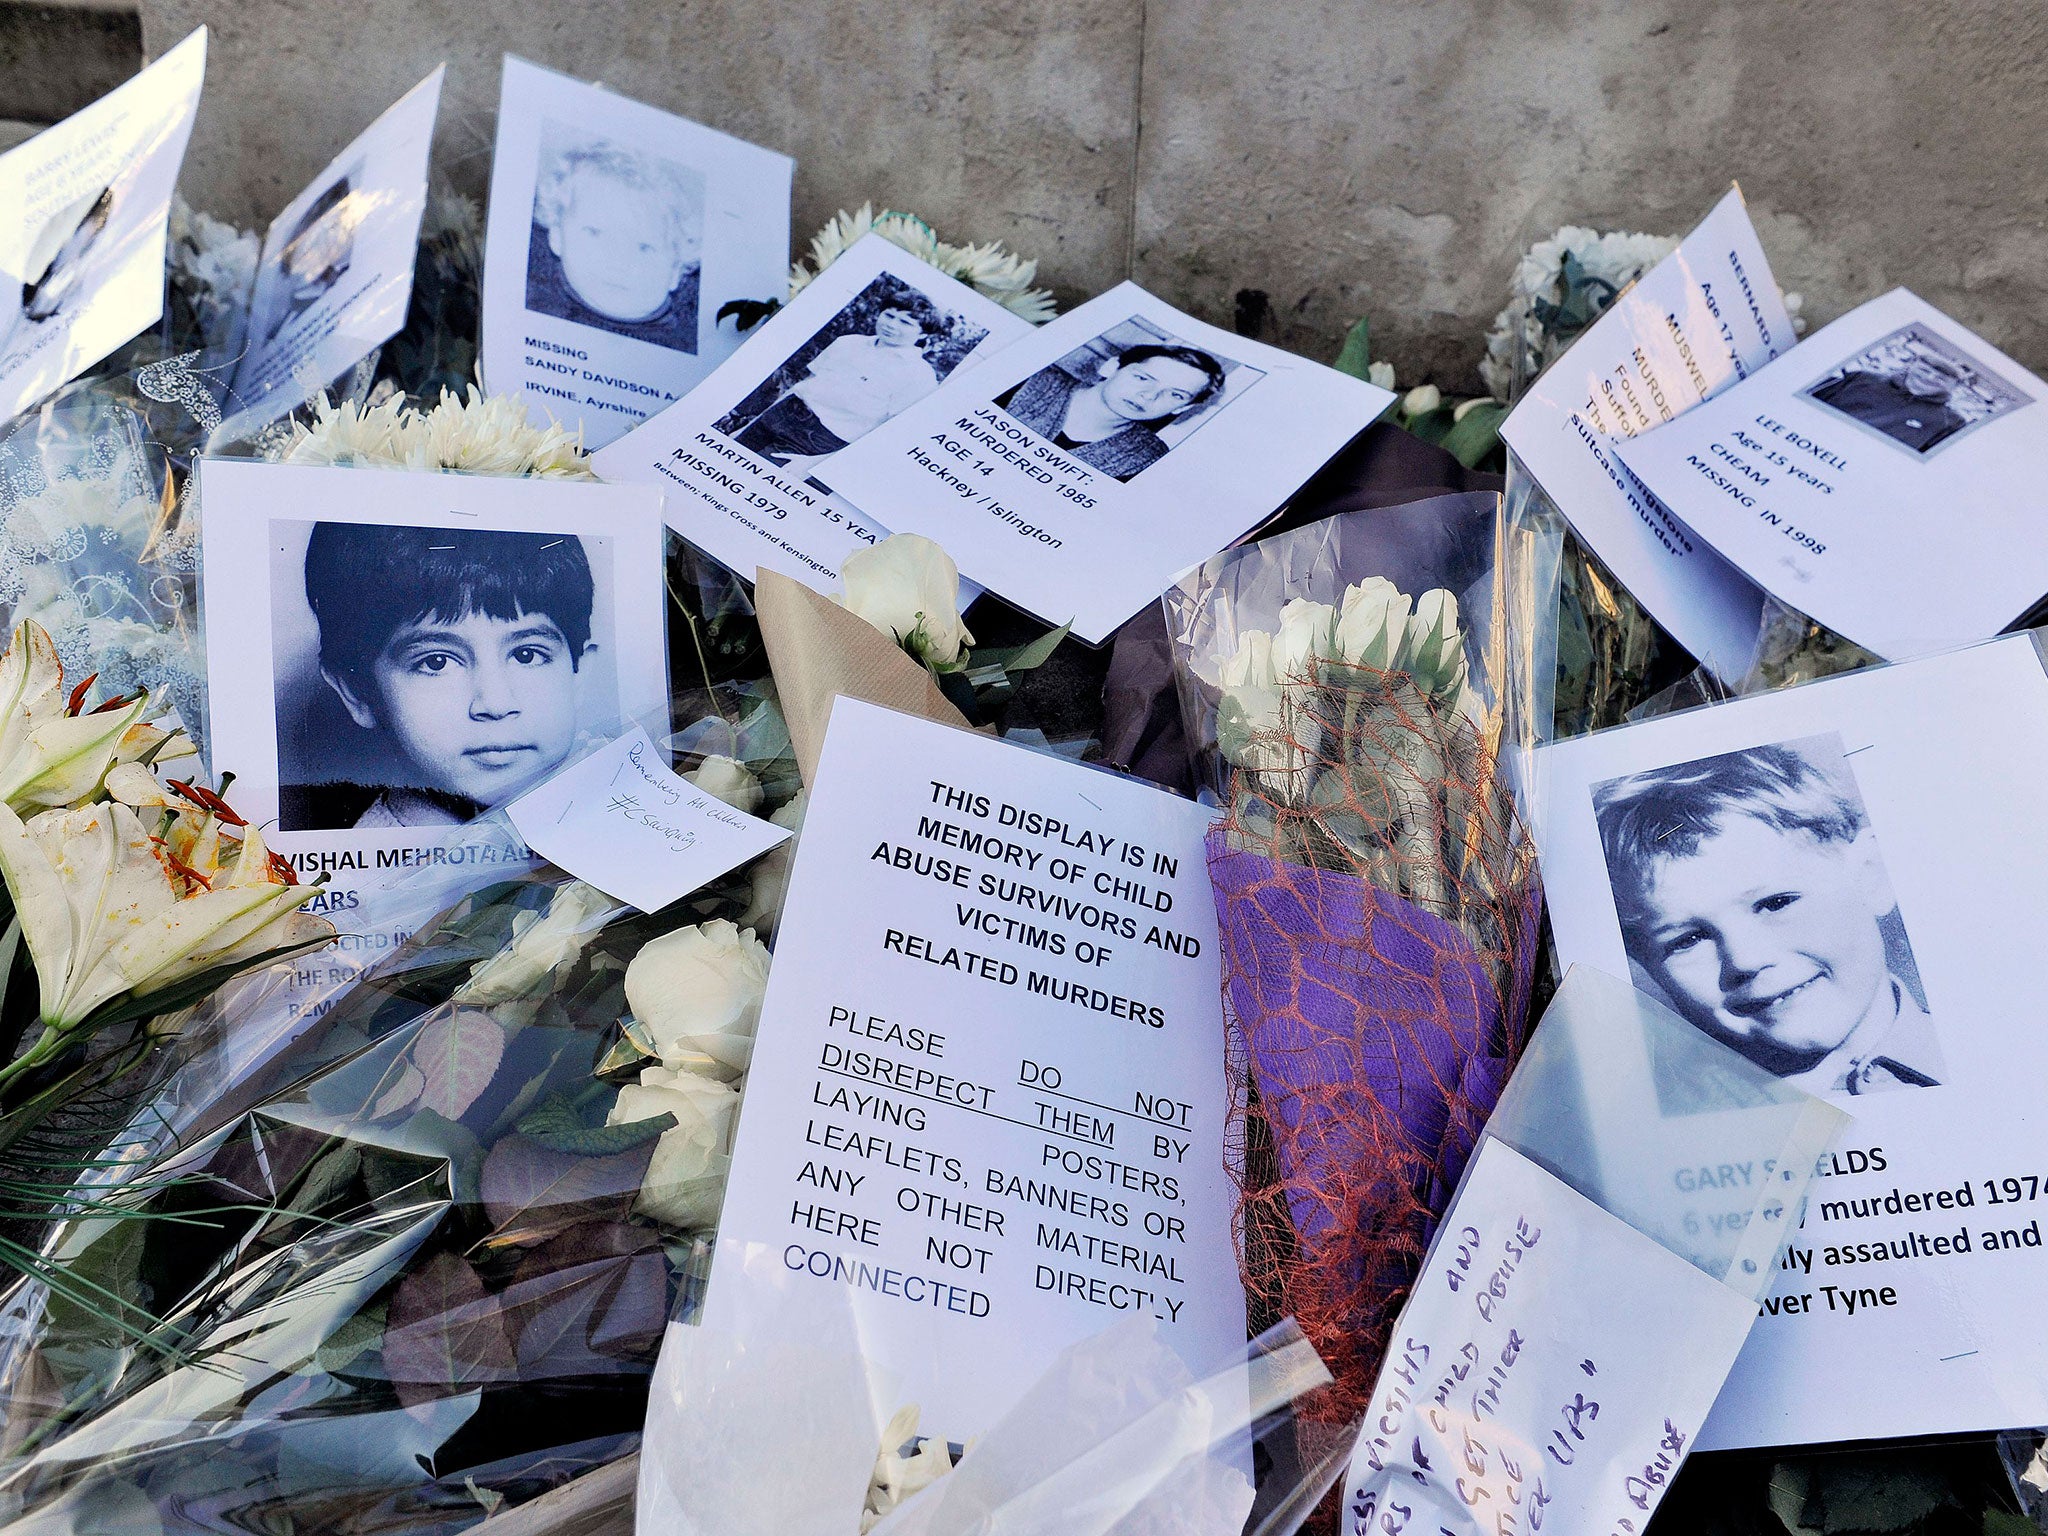 Pictures, messages and floral tributes left at Old Palace Yard in Westminster, organised by the WhiteFlowers Campaign Group in commemoration of victims and survivors of child abuse (PA)